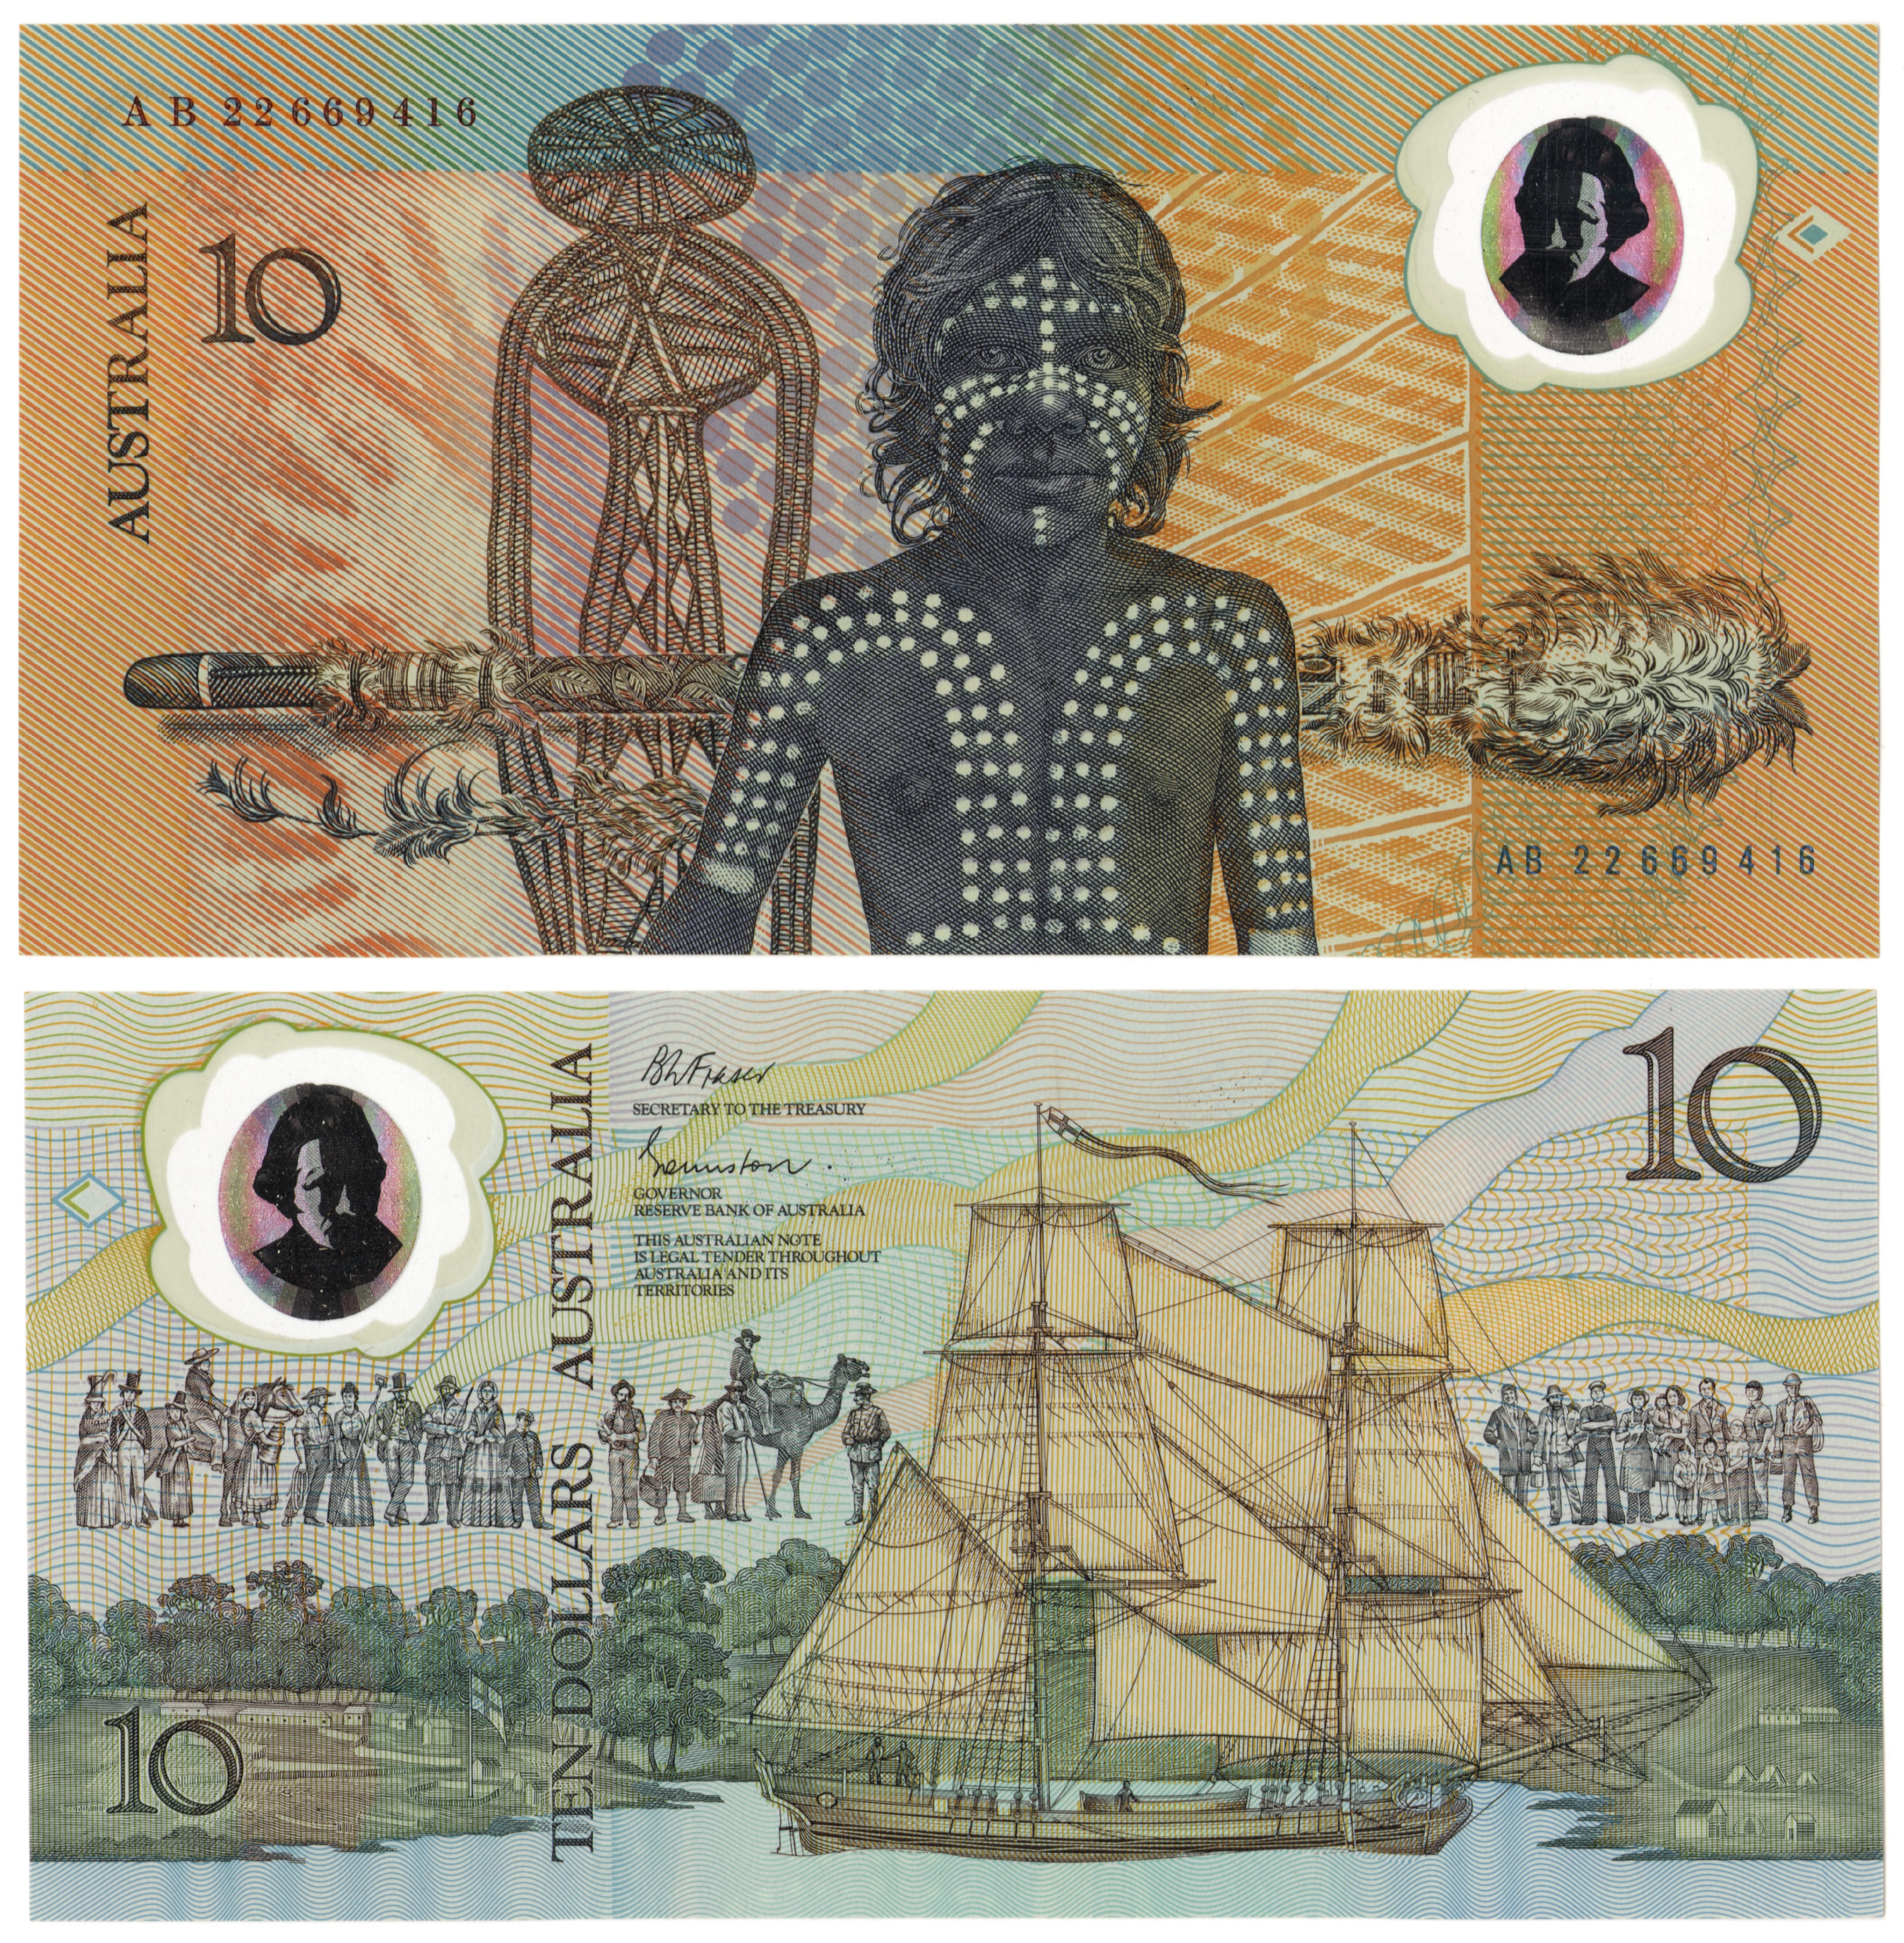 Two images above one another. Both images are banknotes designs from an Australian $10 note. One side depicts an Aboriginal man with body painting. The other shows a tall ship moored in a cove.